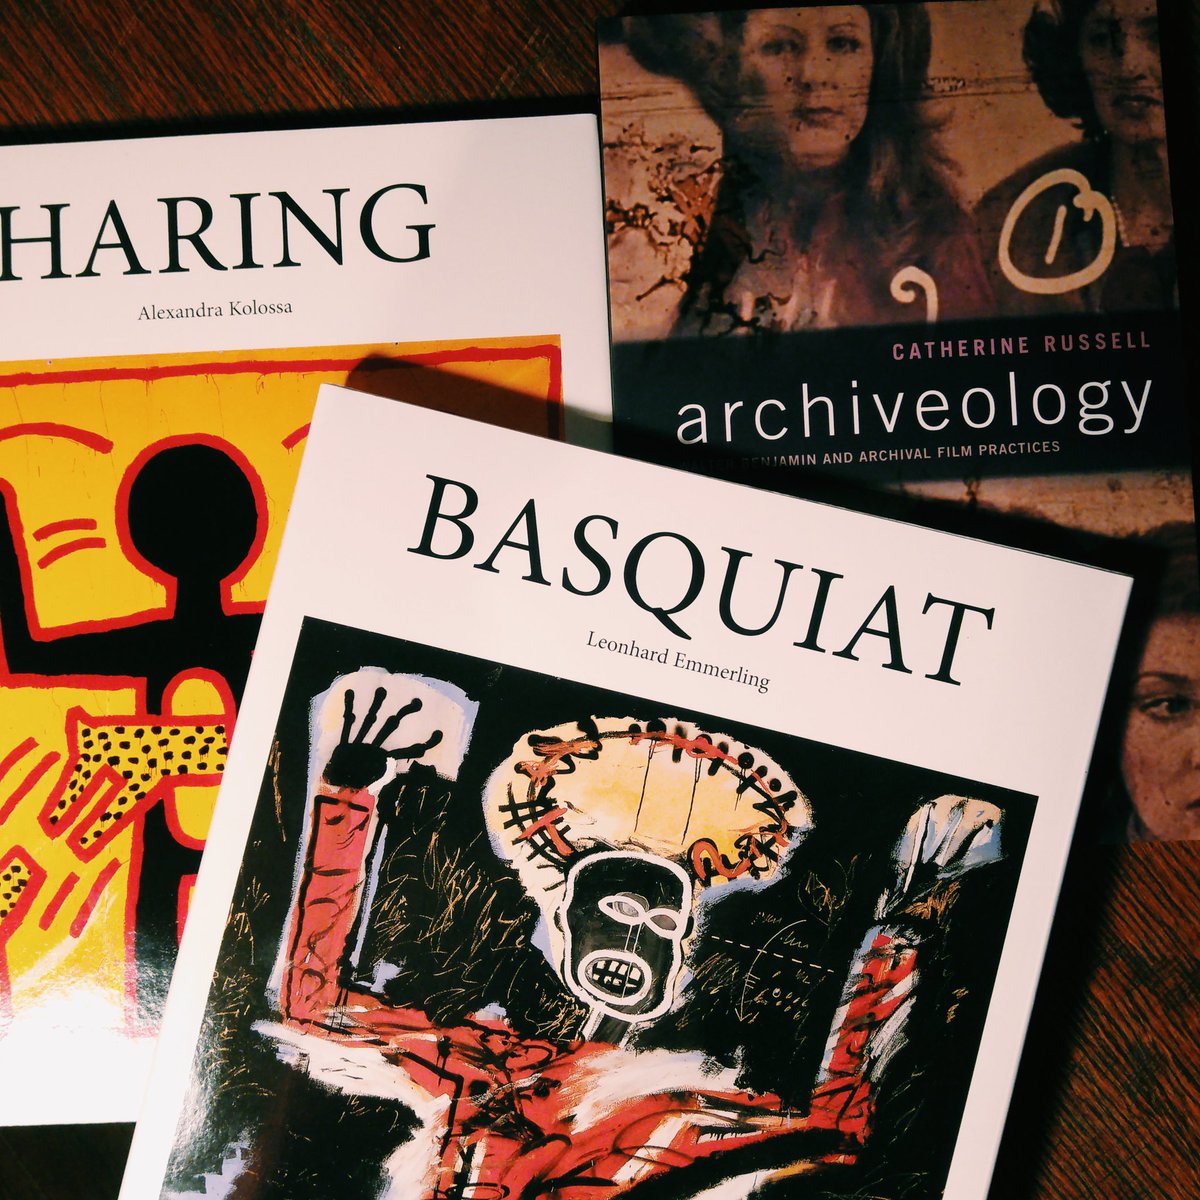 A little book haul to welcome the spring in. Thanks so much @crusatconcordia for Archiveology, and for the lovely inscription especially! Haring and Basquiat from @TASCHEN.